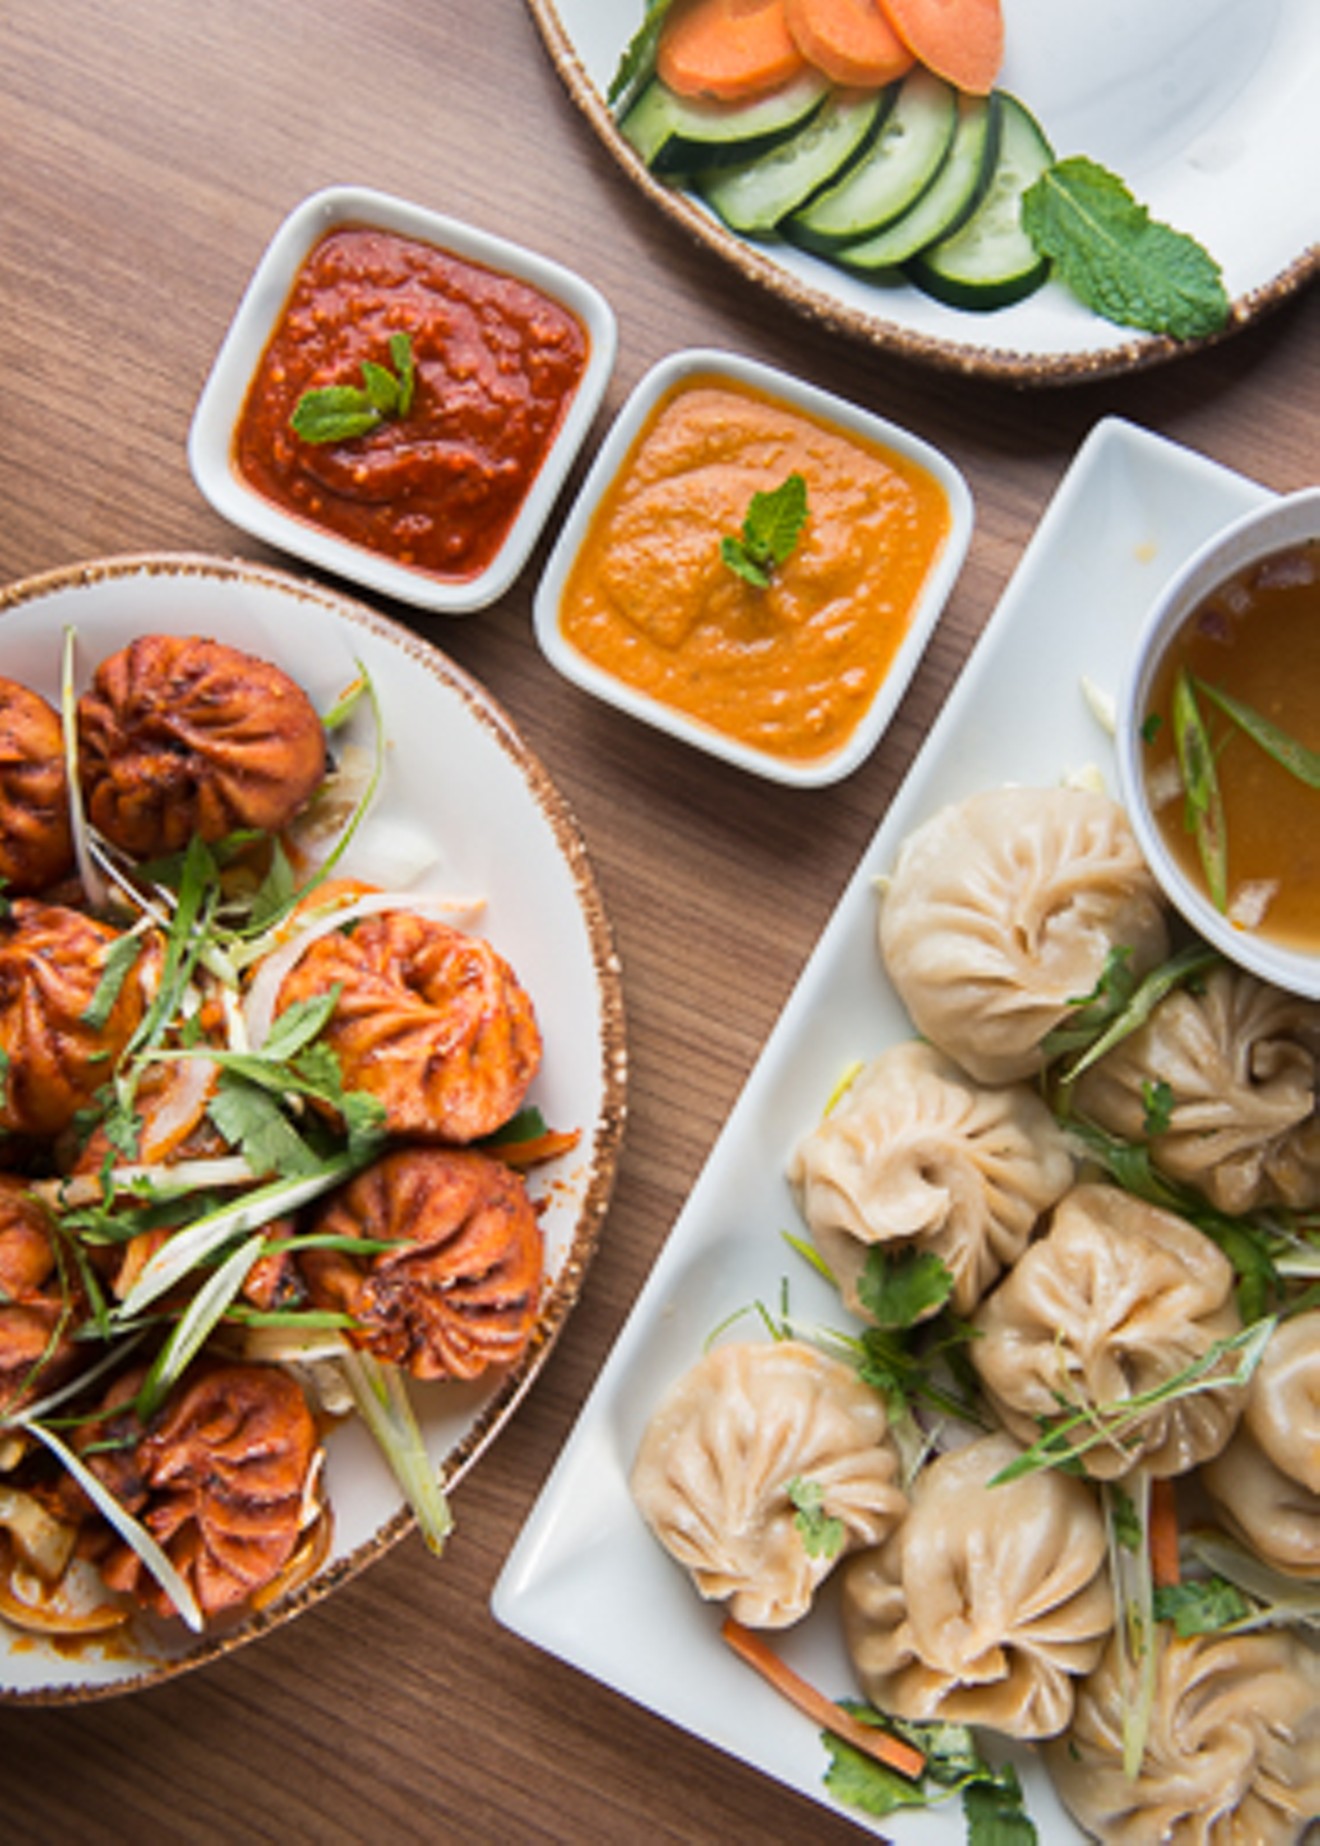 A spread of momos at Peak Restaurant, one of America's tragically few Nepalese sports bars.